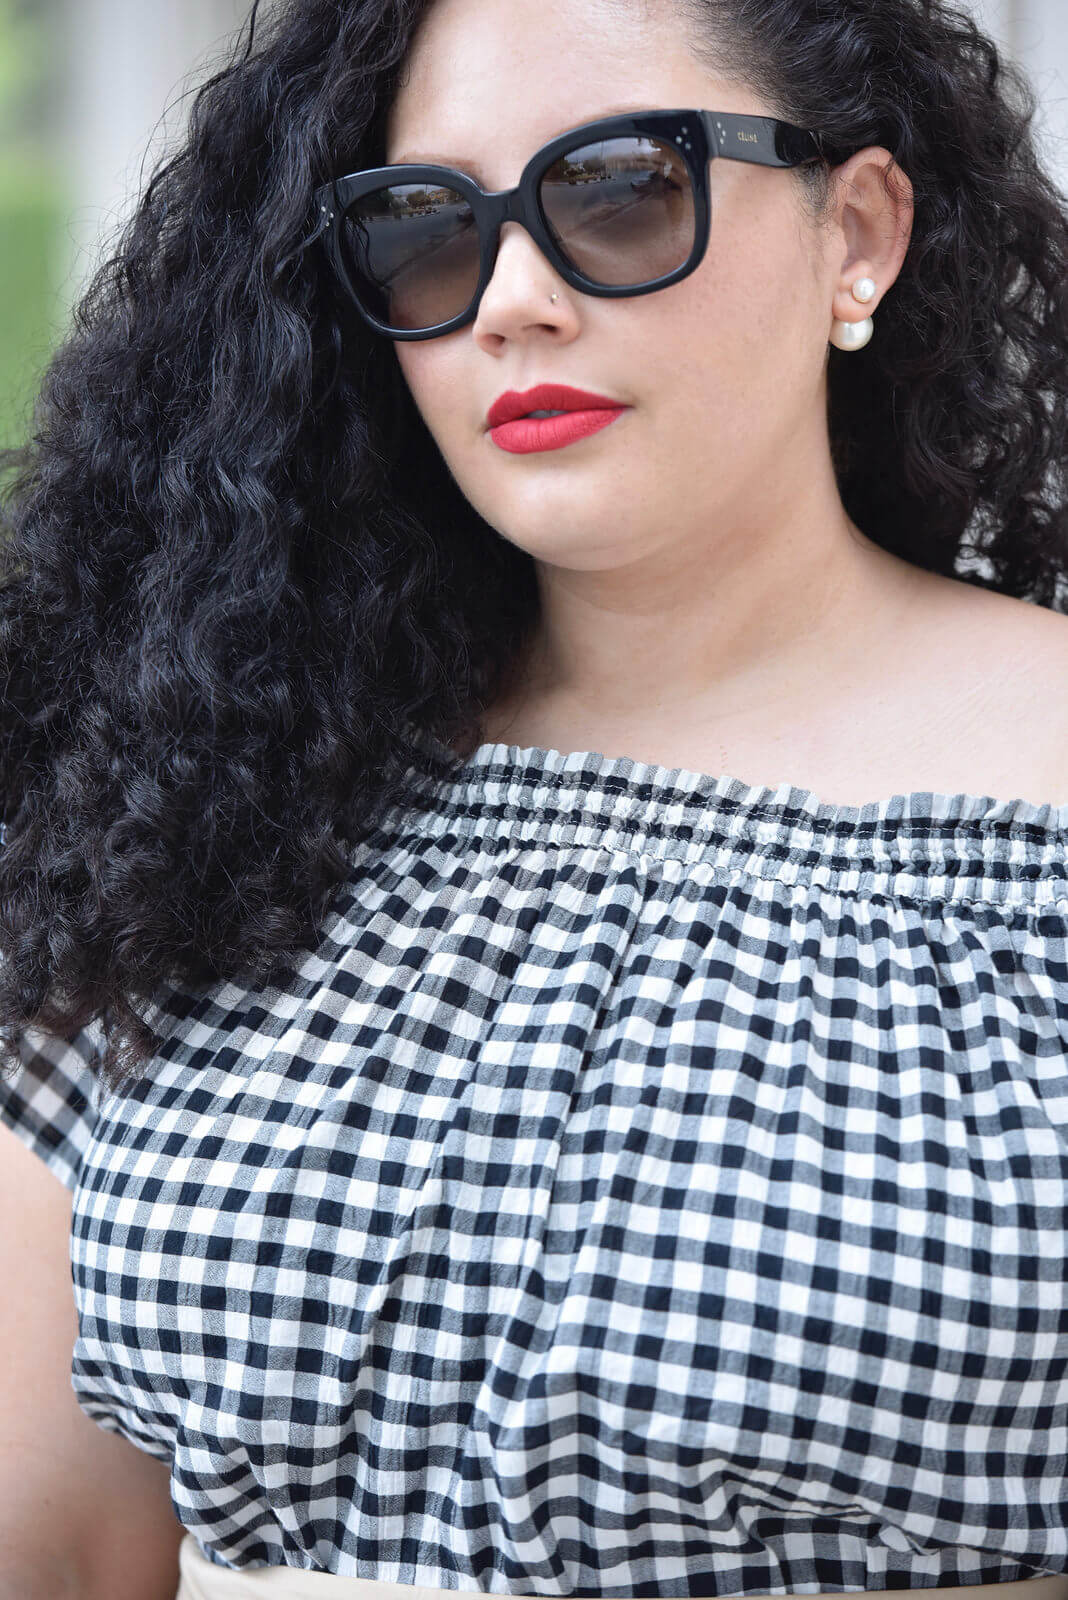 Two Trends I'm Really Excited About Right Now via @GirlWithCurves